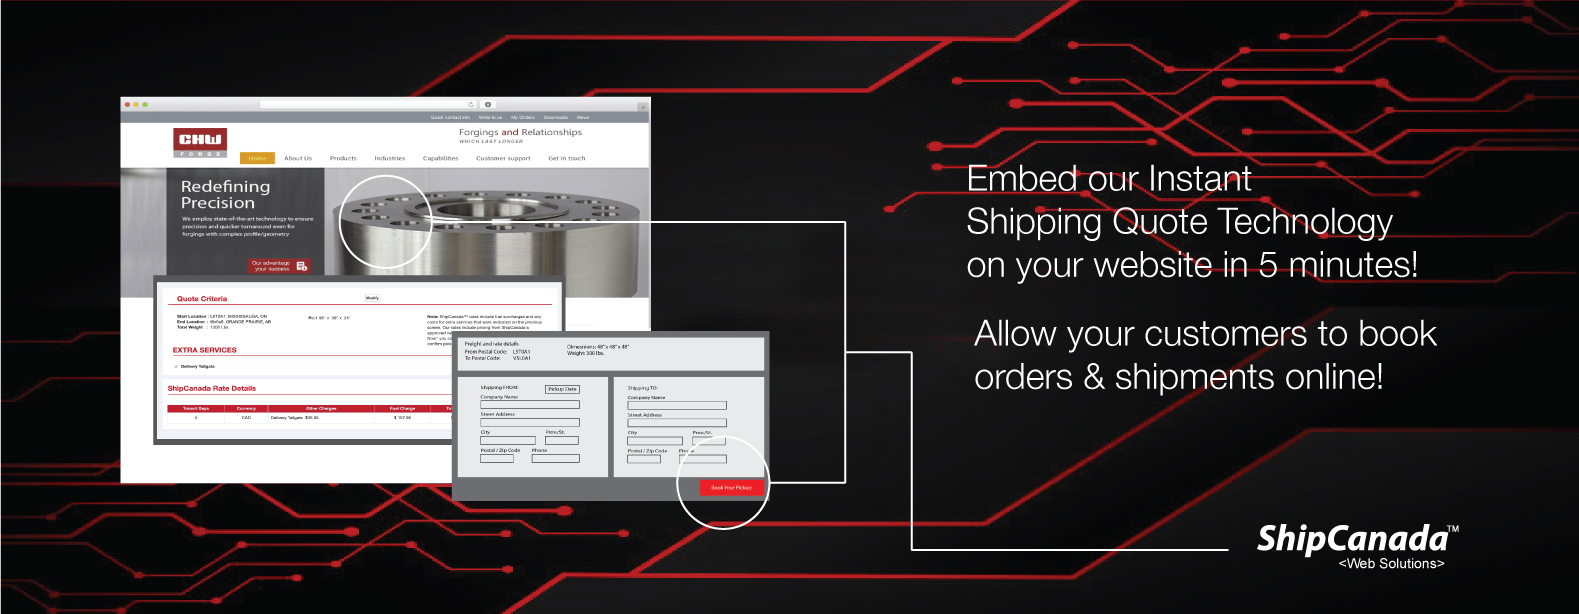 Instant Shipping Quotes Technology